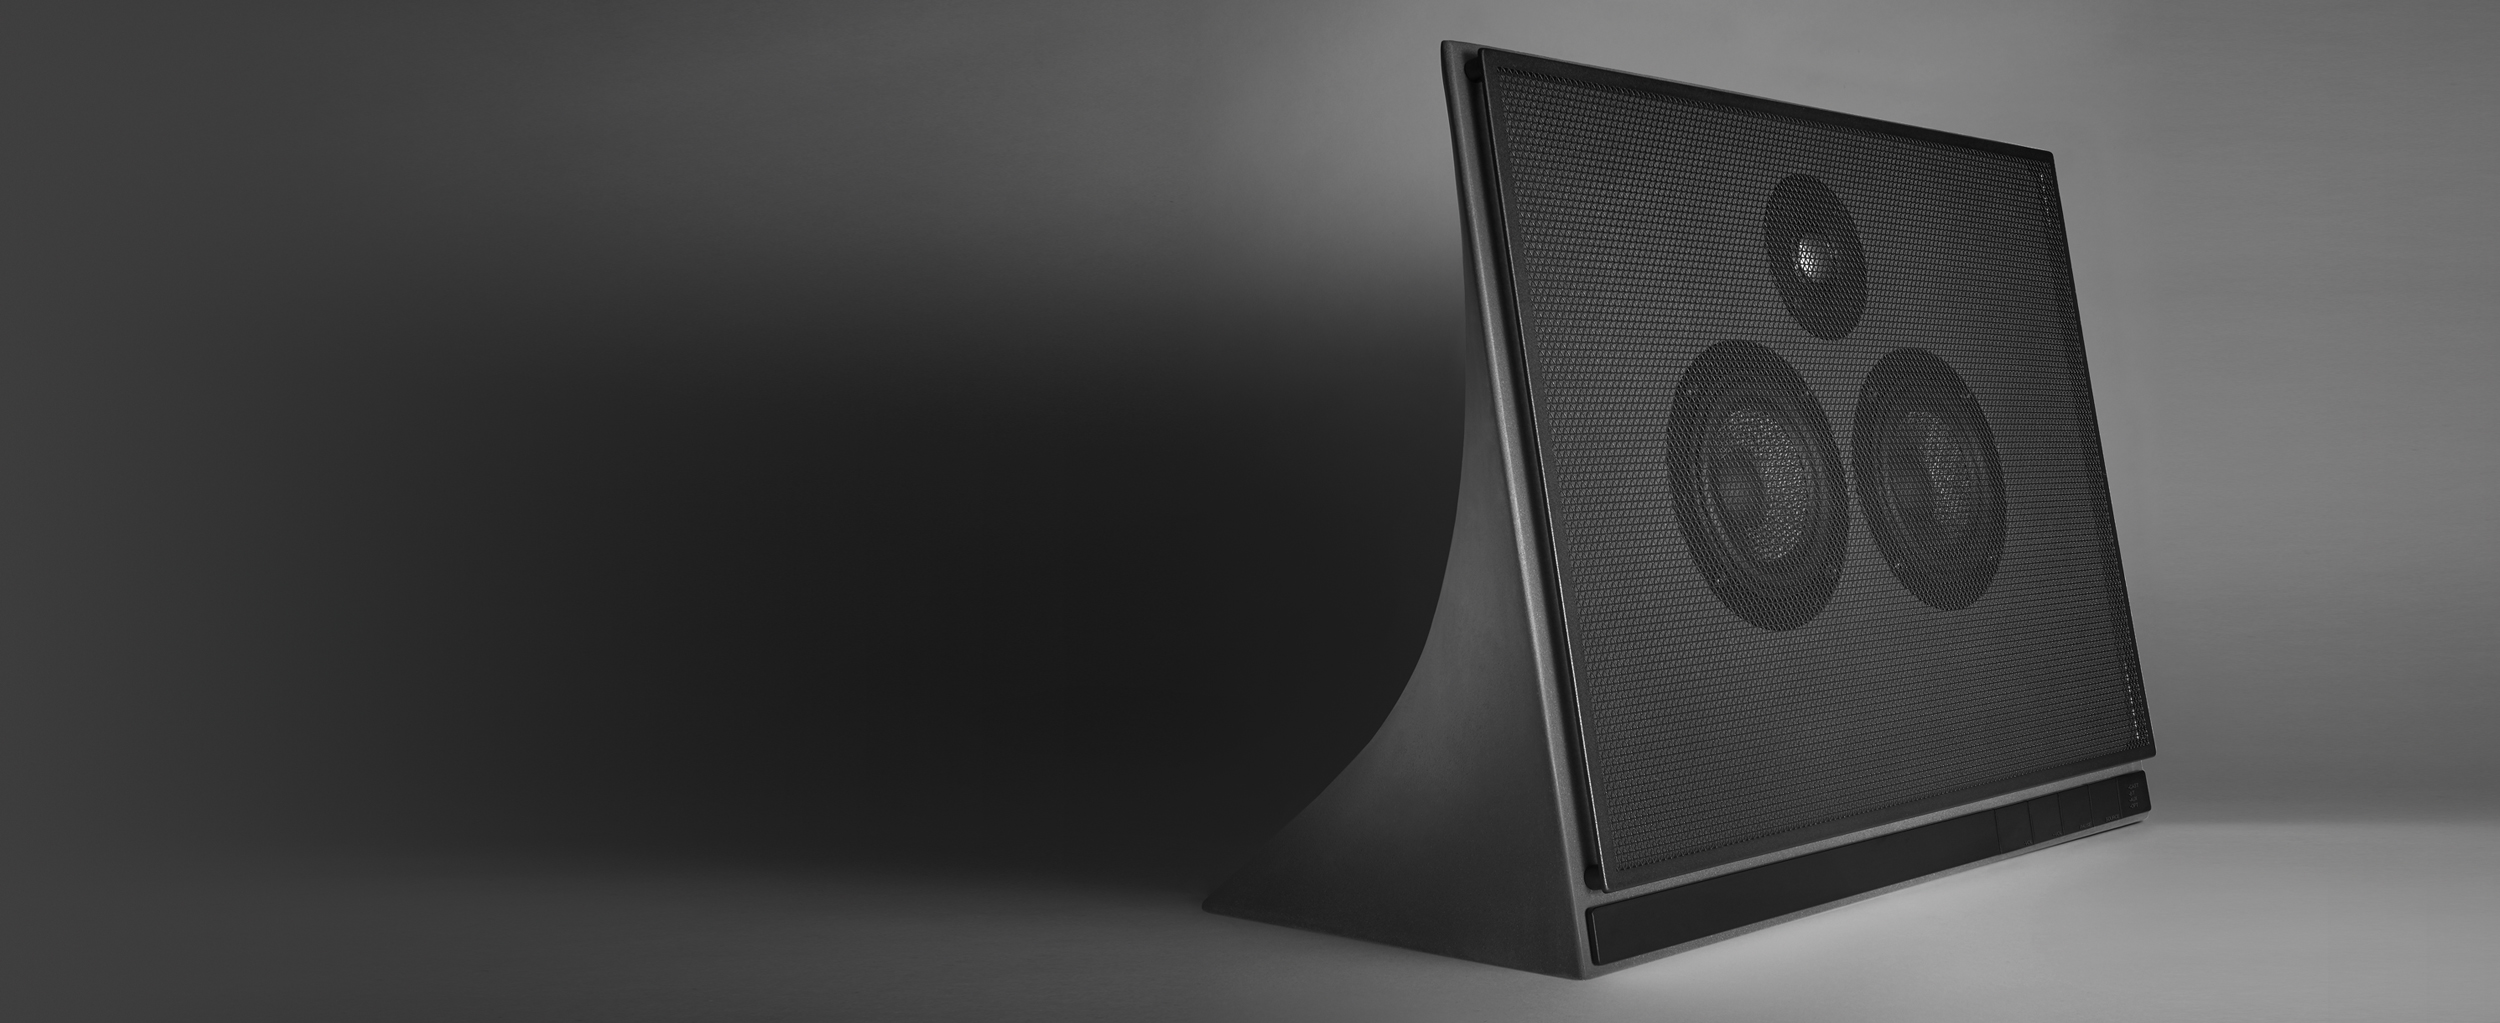 Introducing The MA770 Wireless Speaker In Black